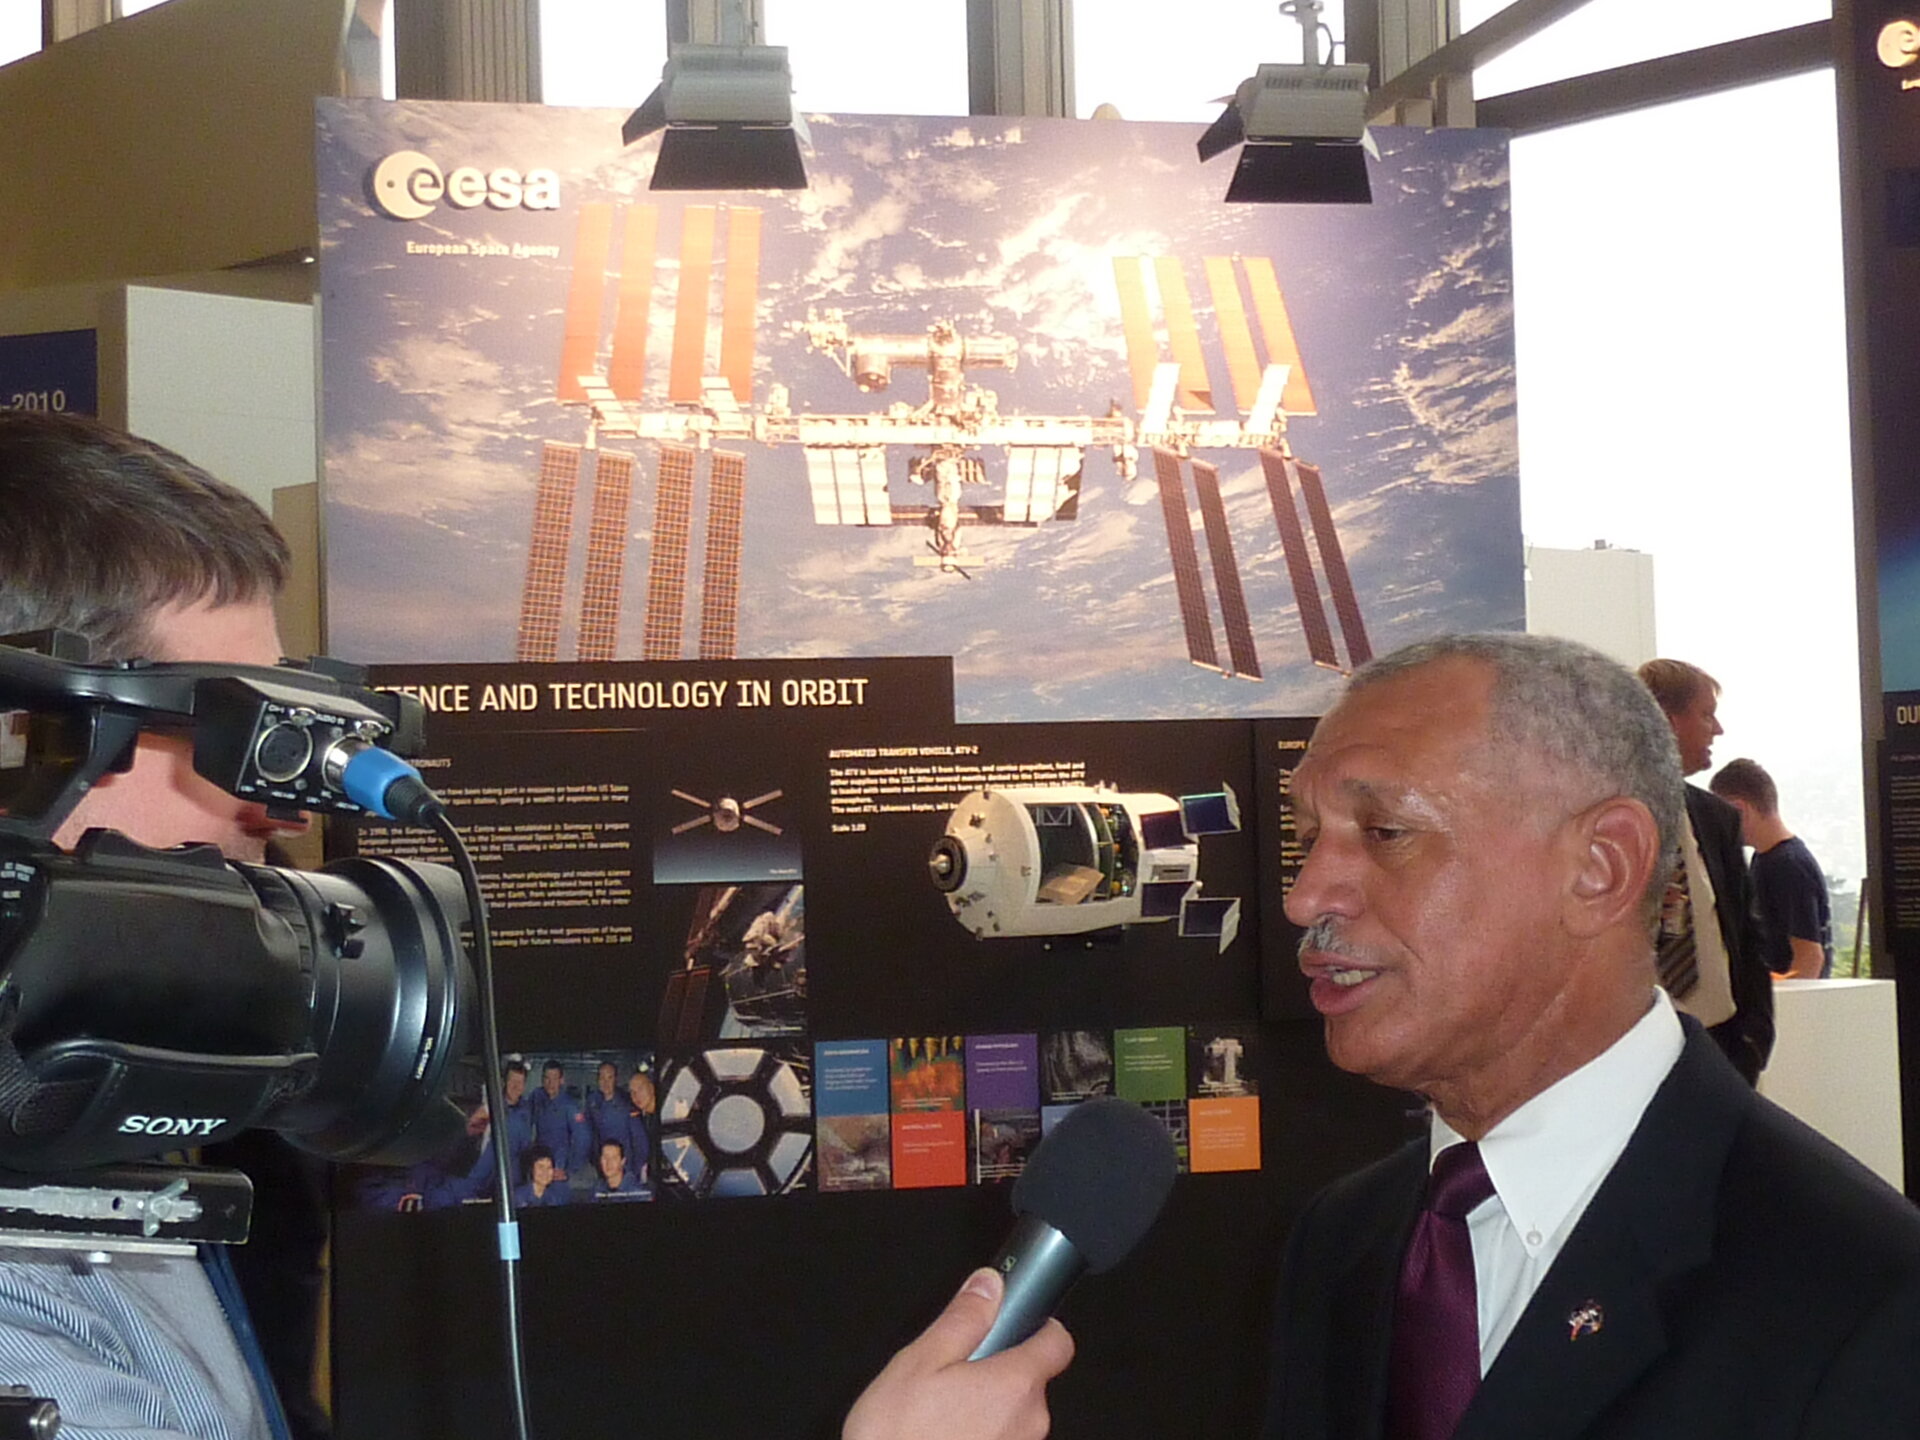 Press interview with Charles Bolden on the ESA stand